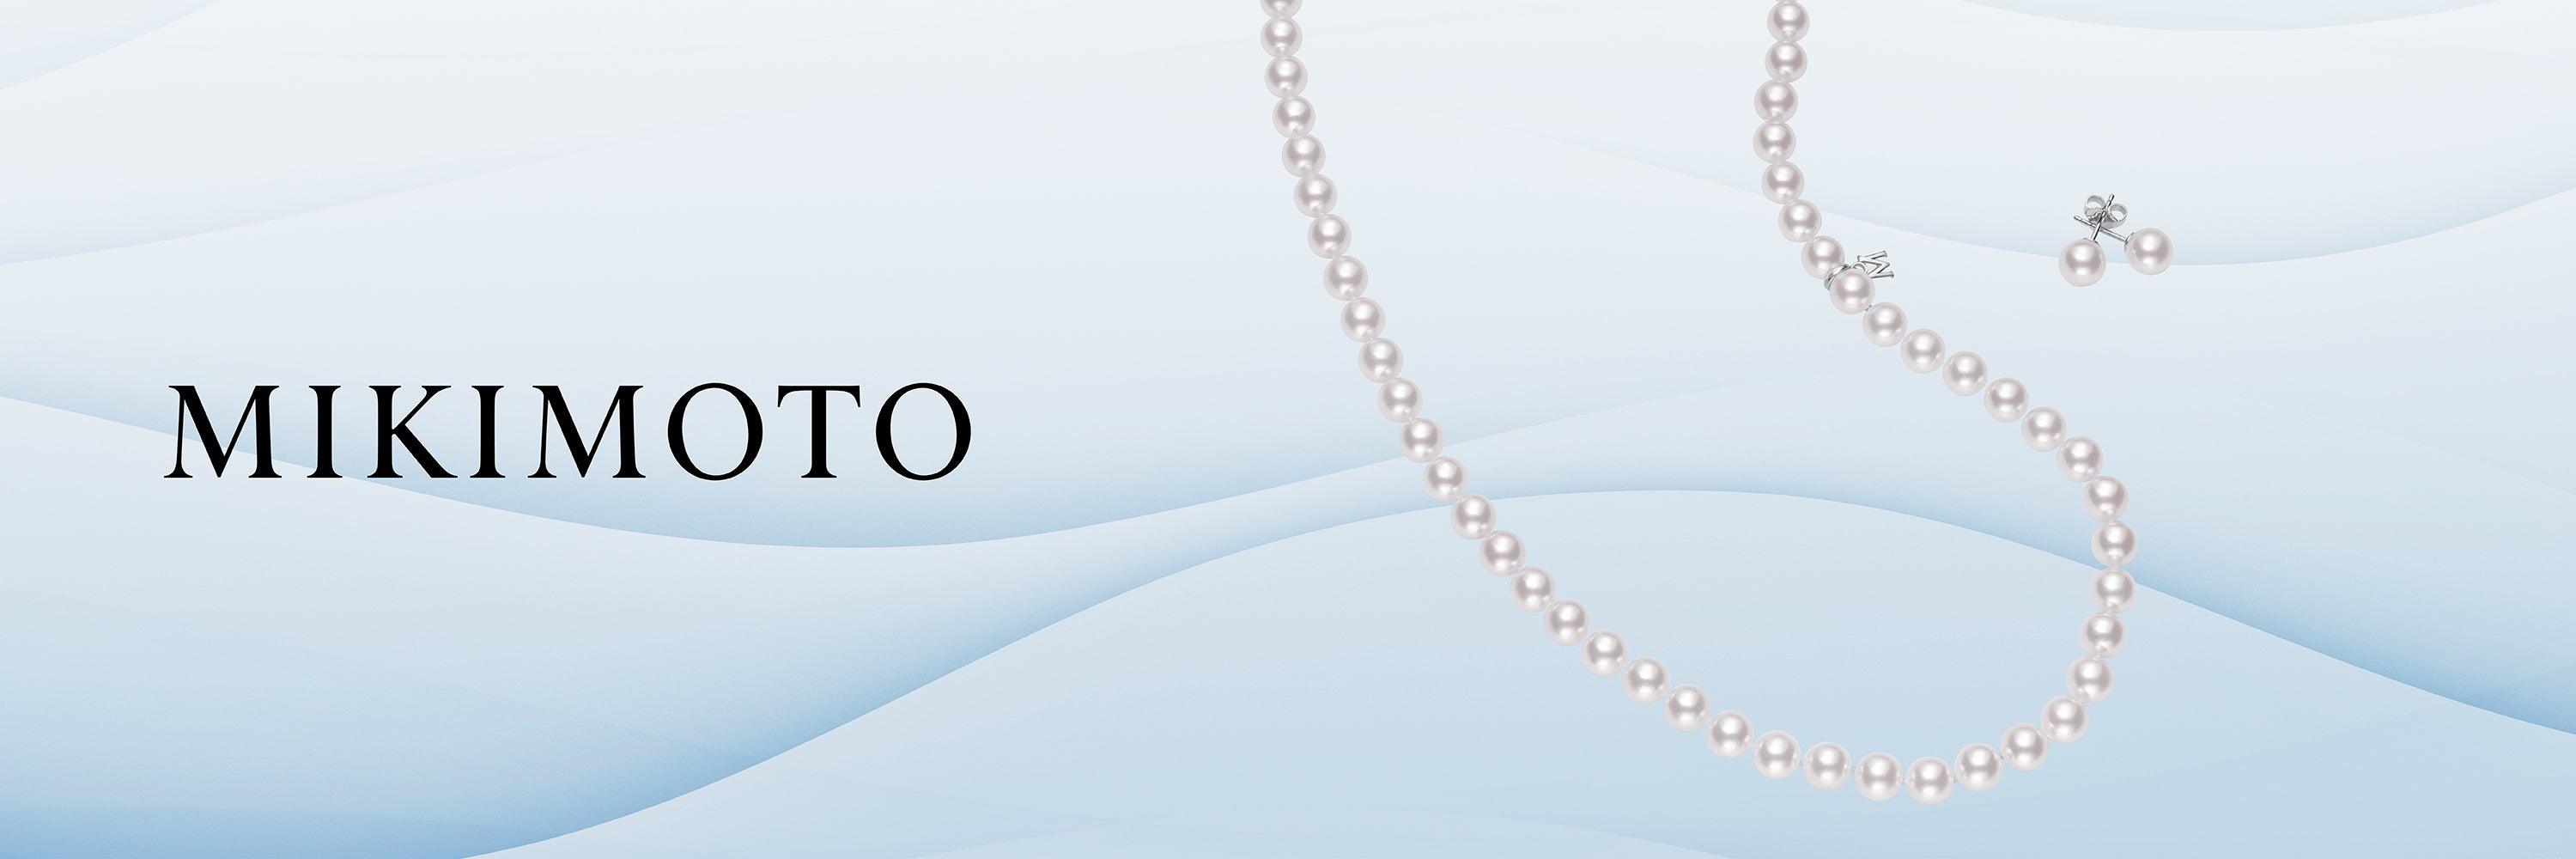 Mikimoto pearl necklace and earrings on a wavy background with the Mikimoto logo.